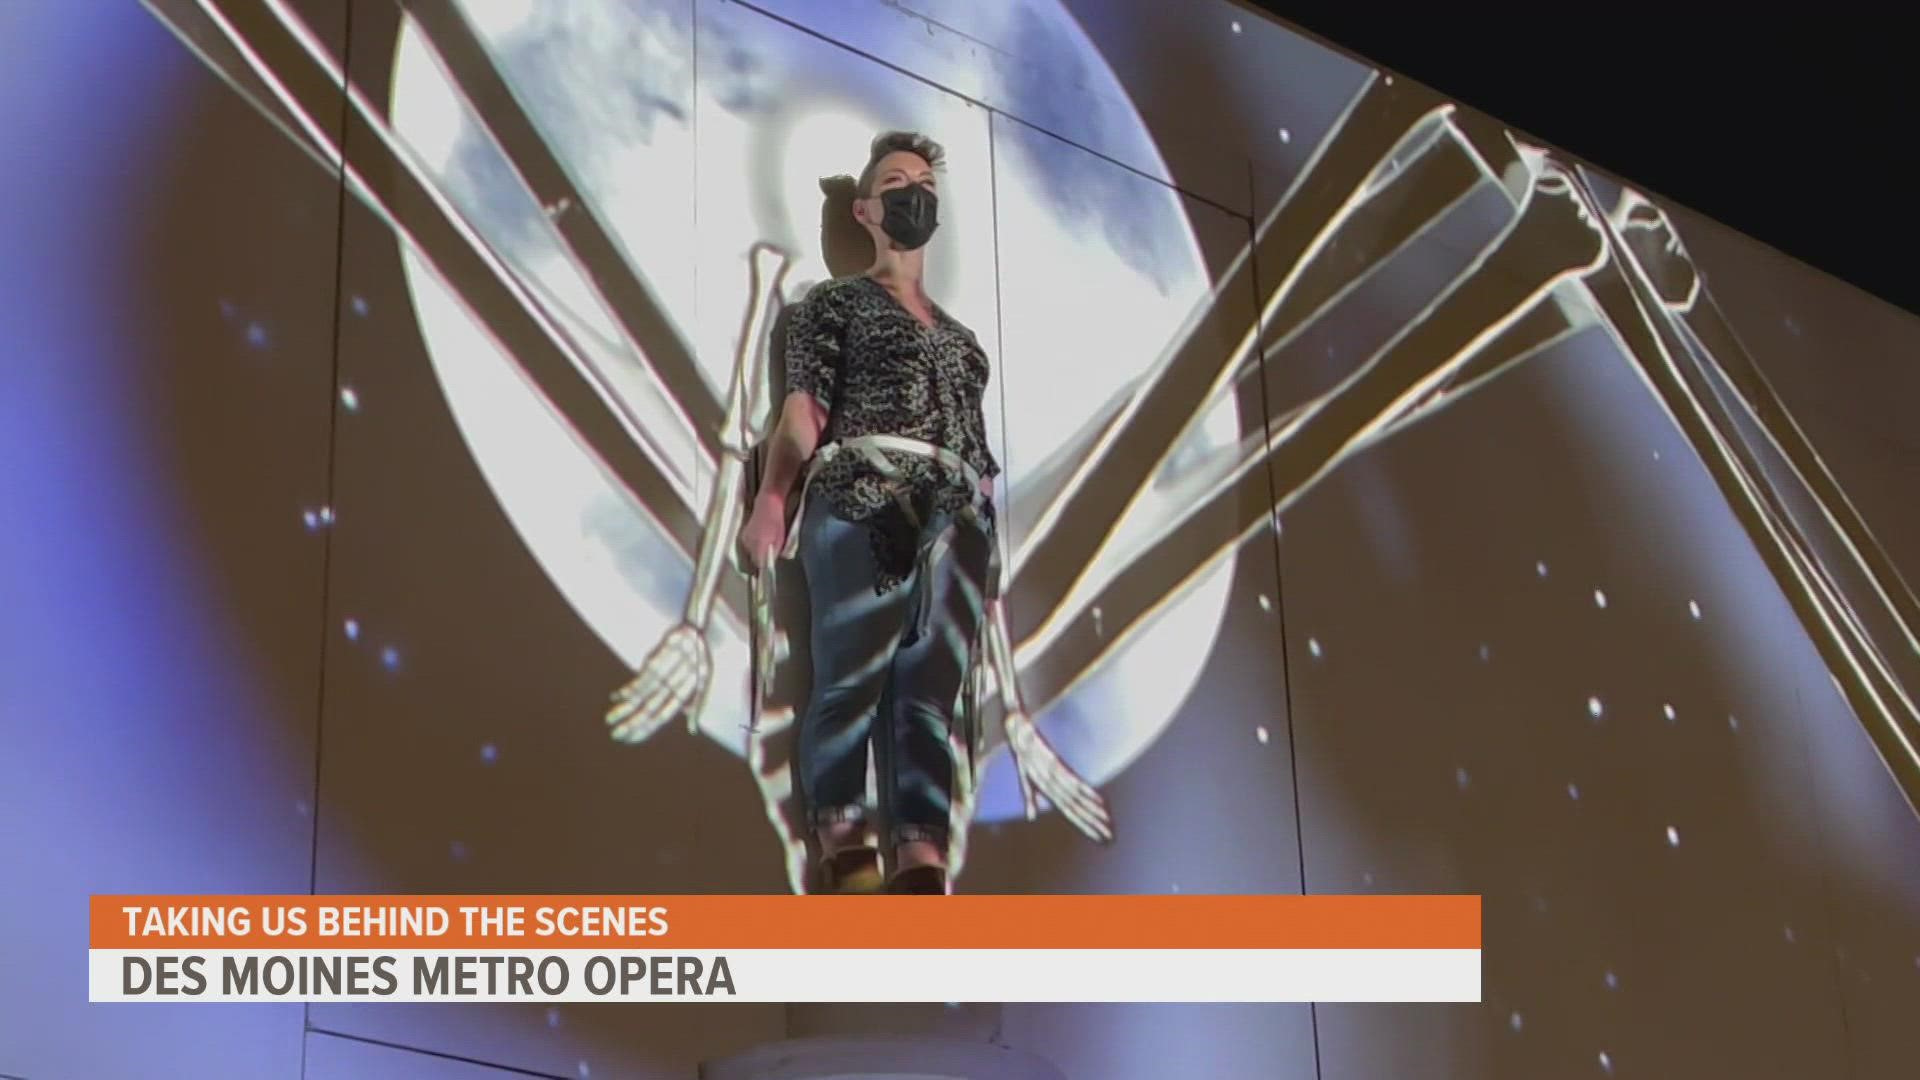 Local 5's Jackie Schmillen steps into the experience of the visually reimagined production of "The Magic Flute."